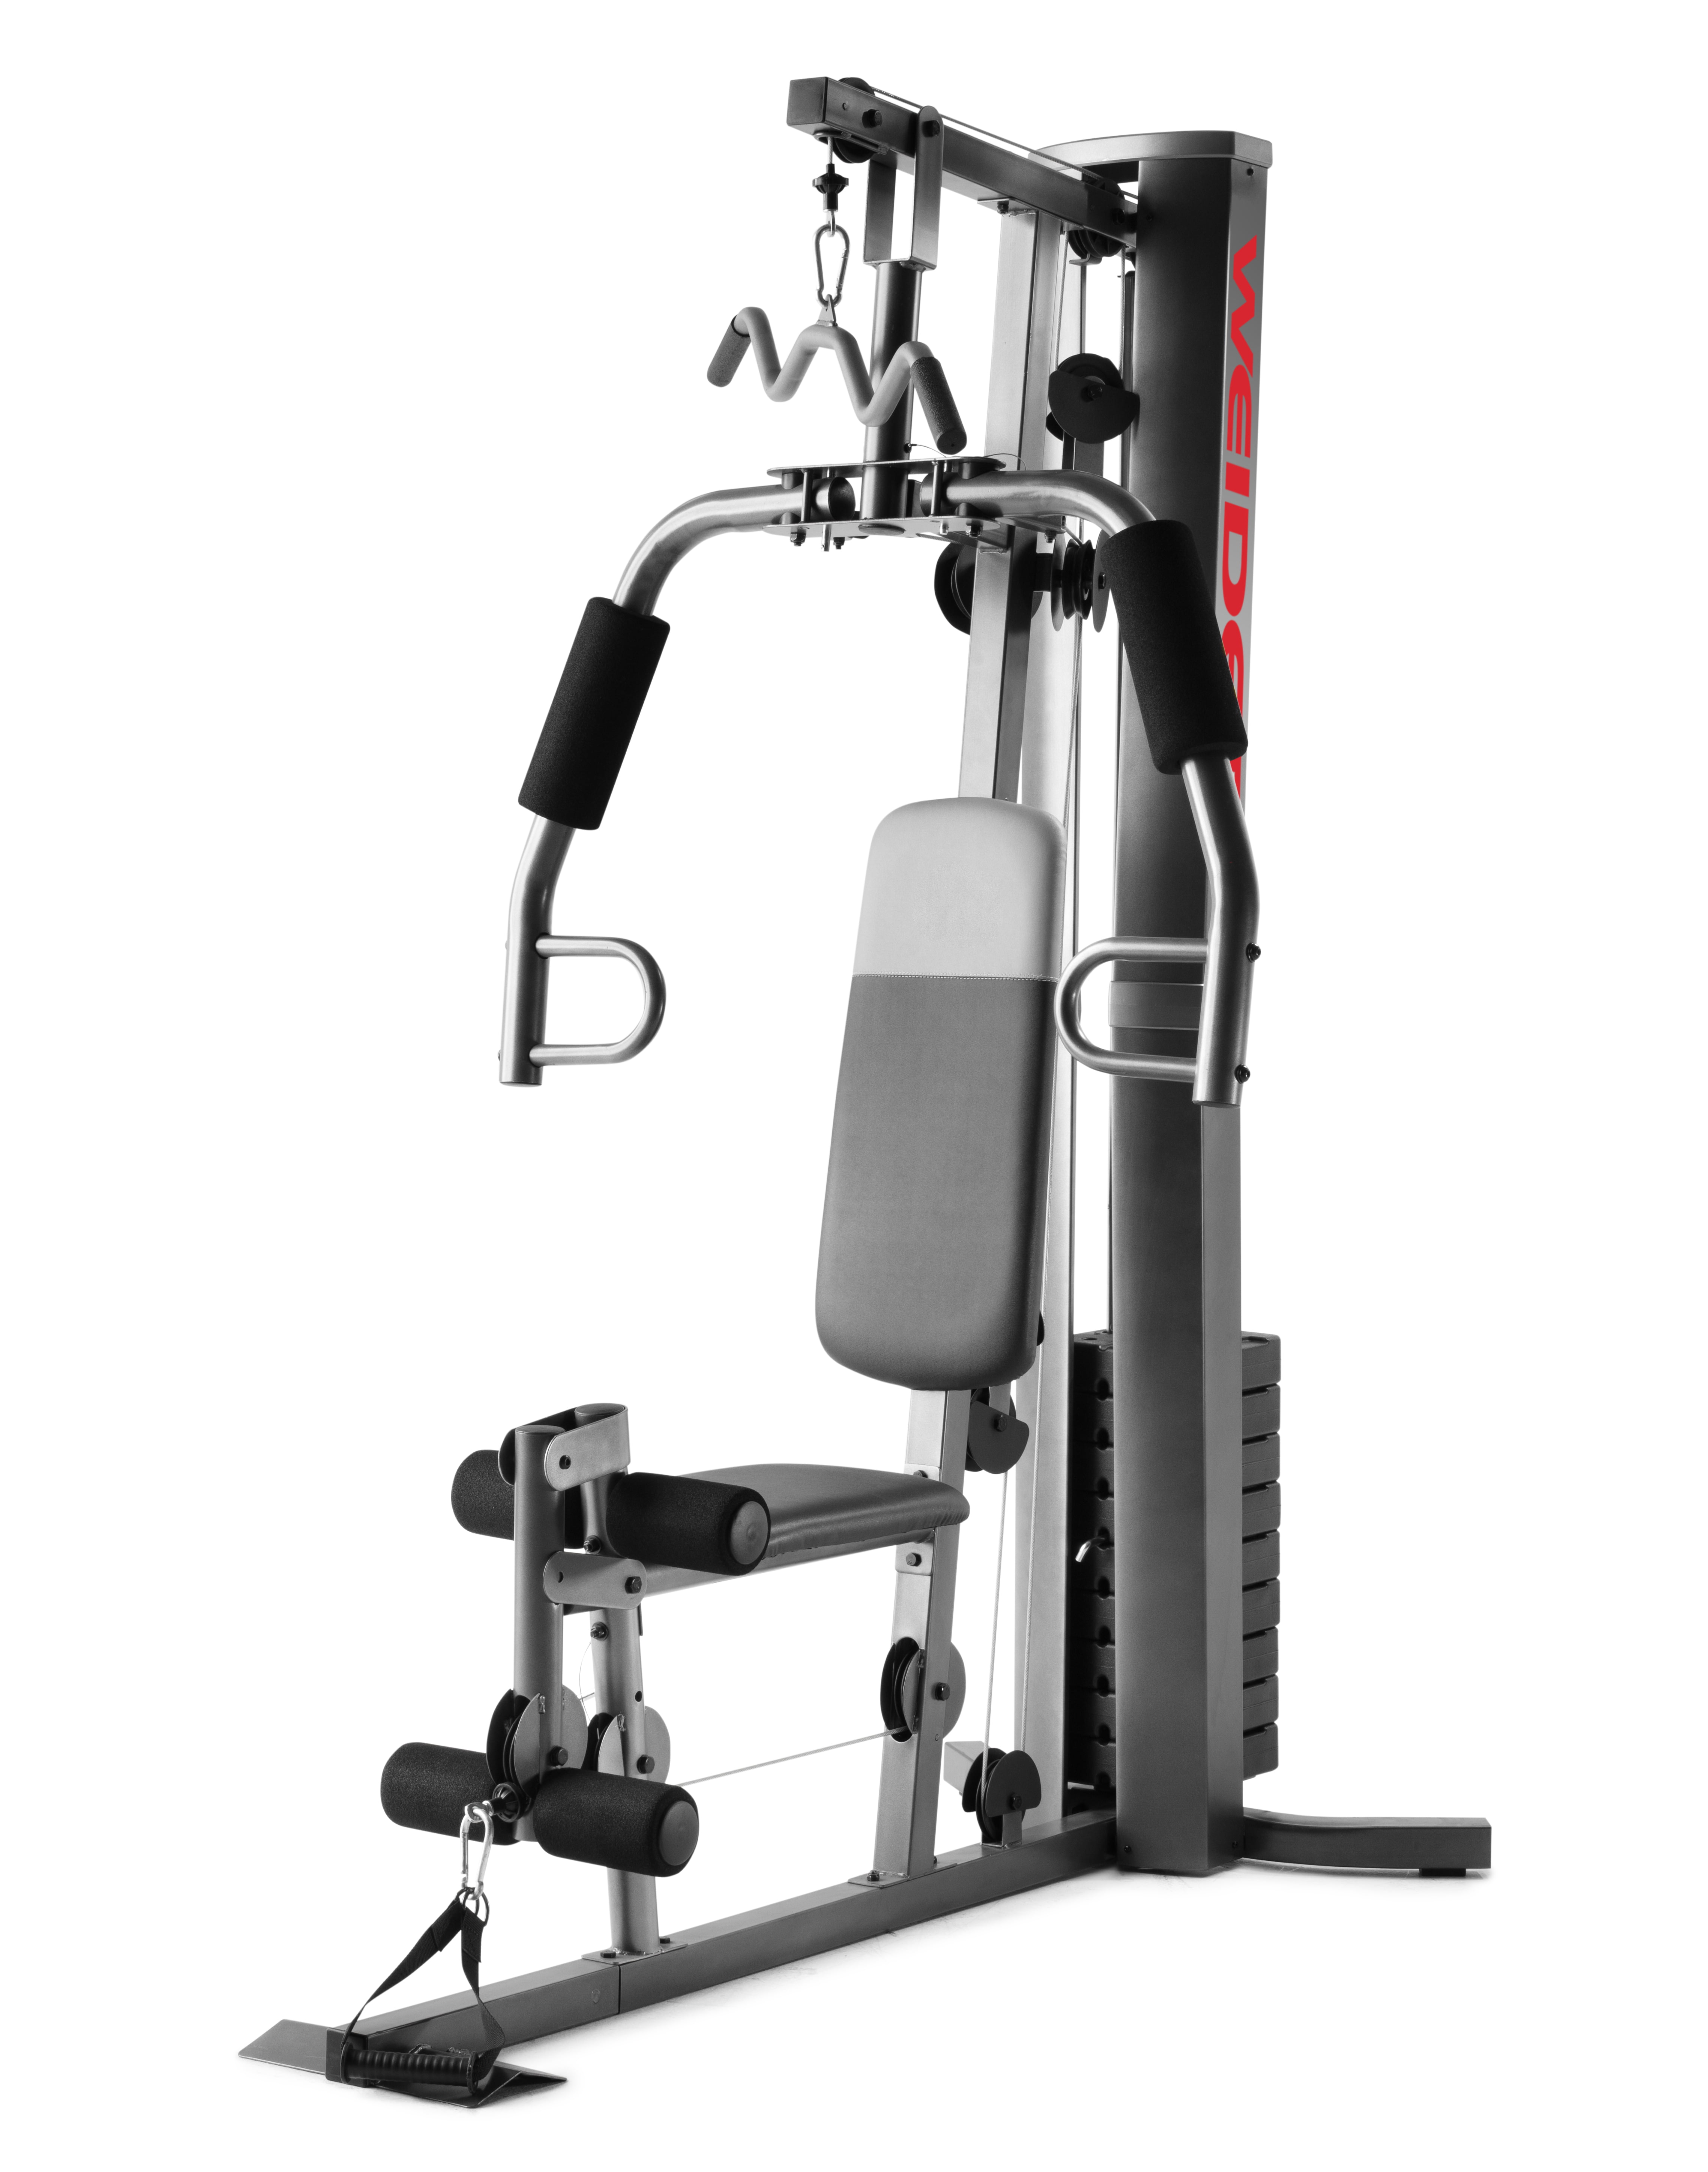 Weider XRS 50 Home Gym with High and Low Pulley System for Total-Body Training